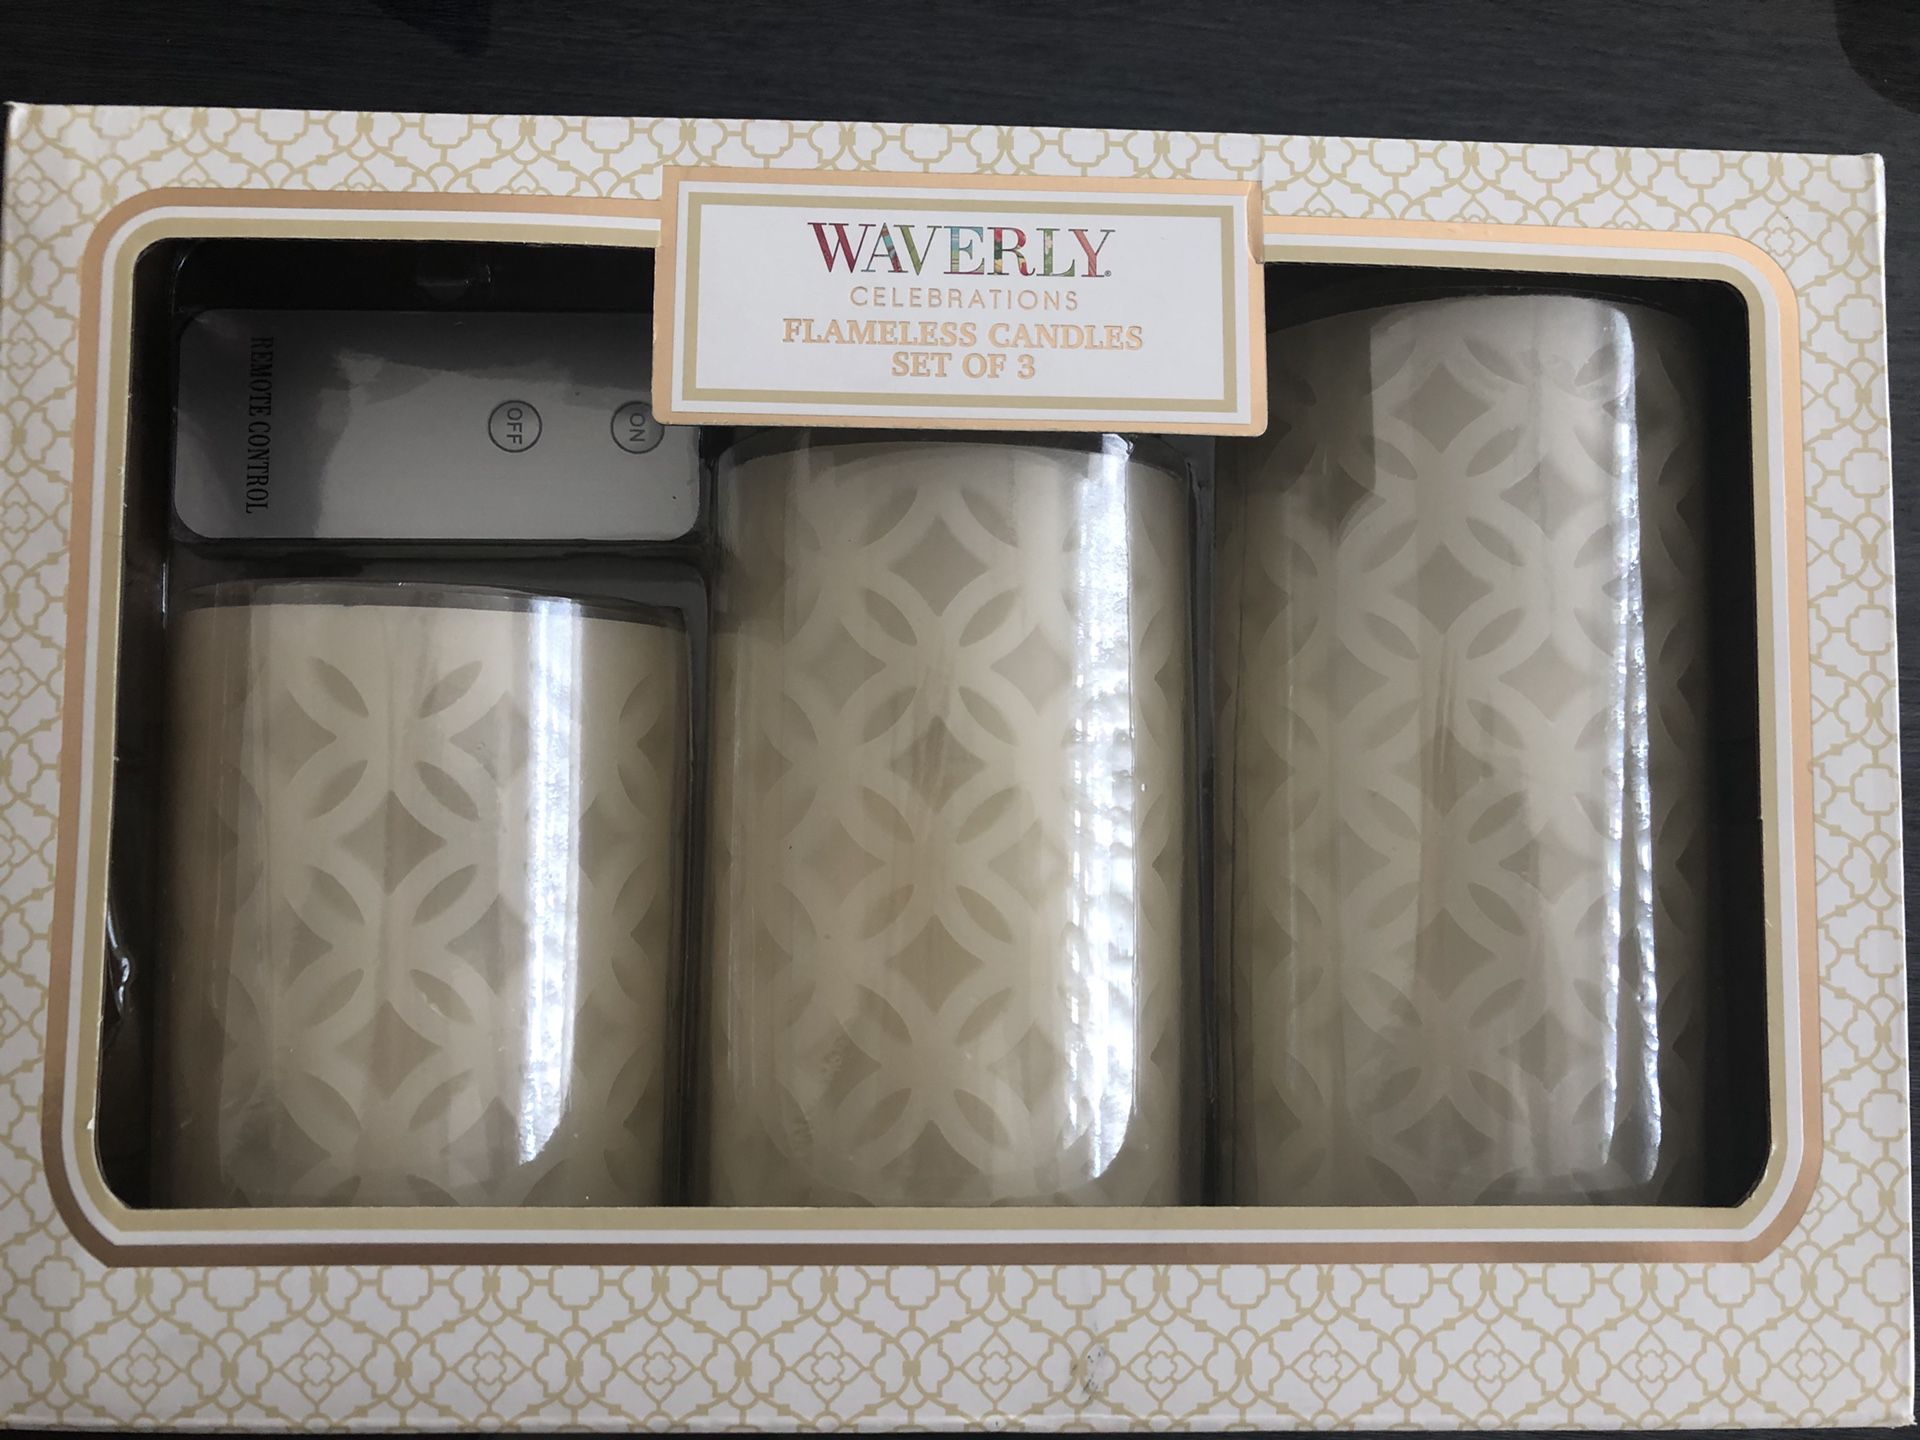 Waverly flameless candles